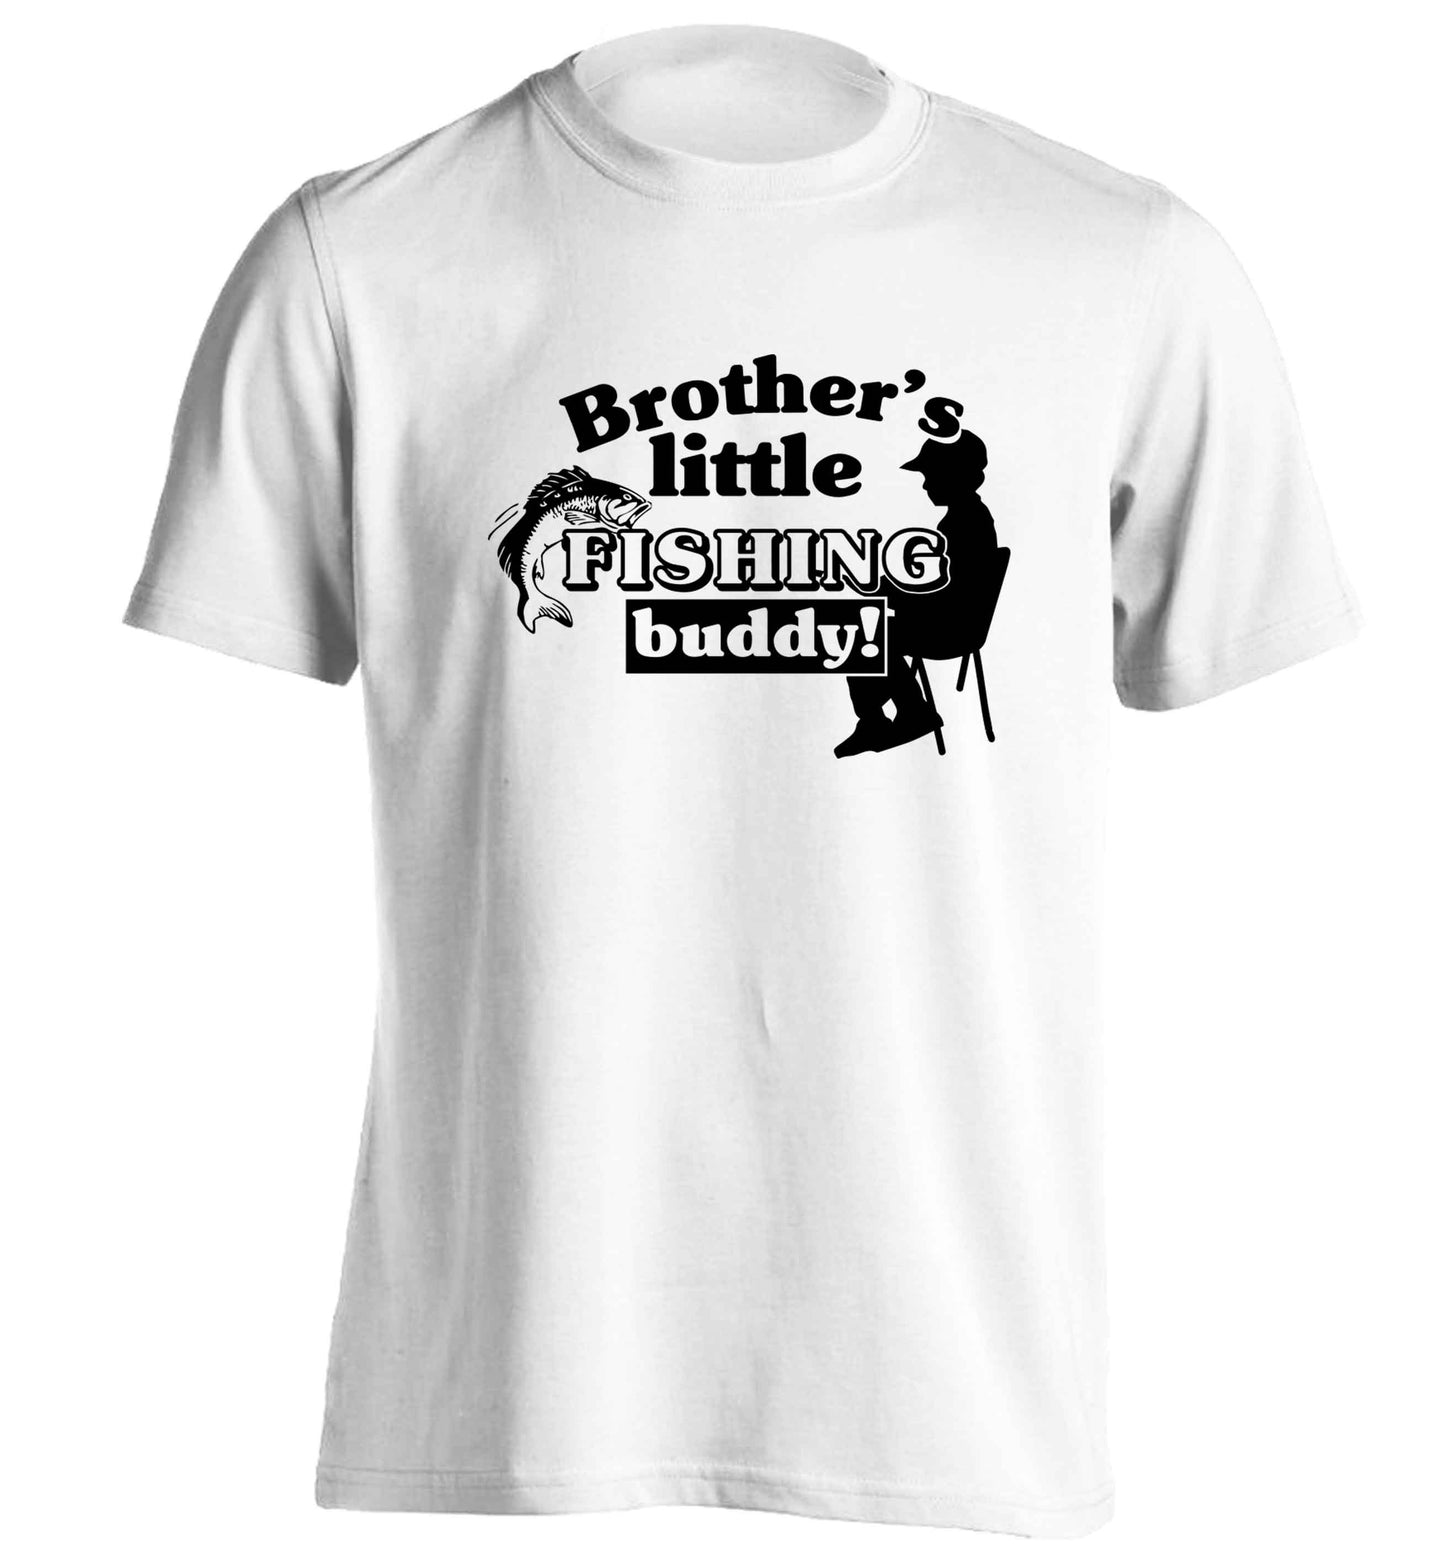 Brother's little fishing buddy adults unisex white Tshirt 2XL